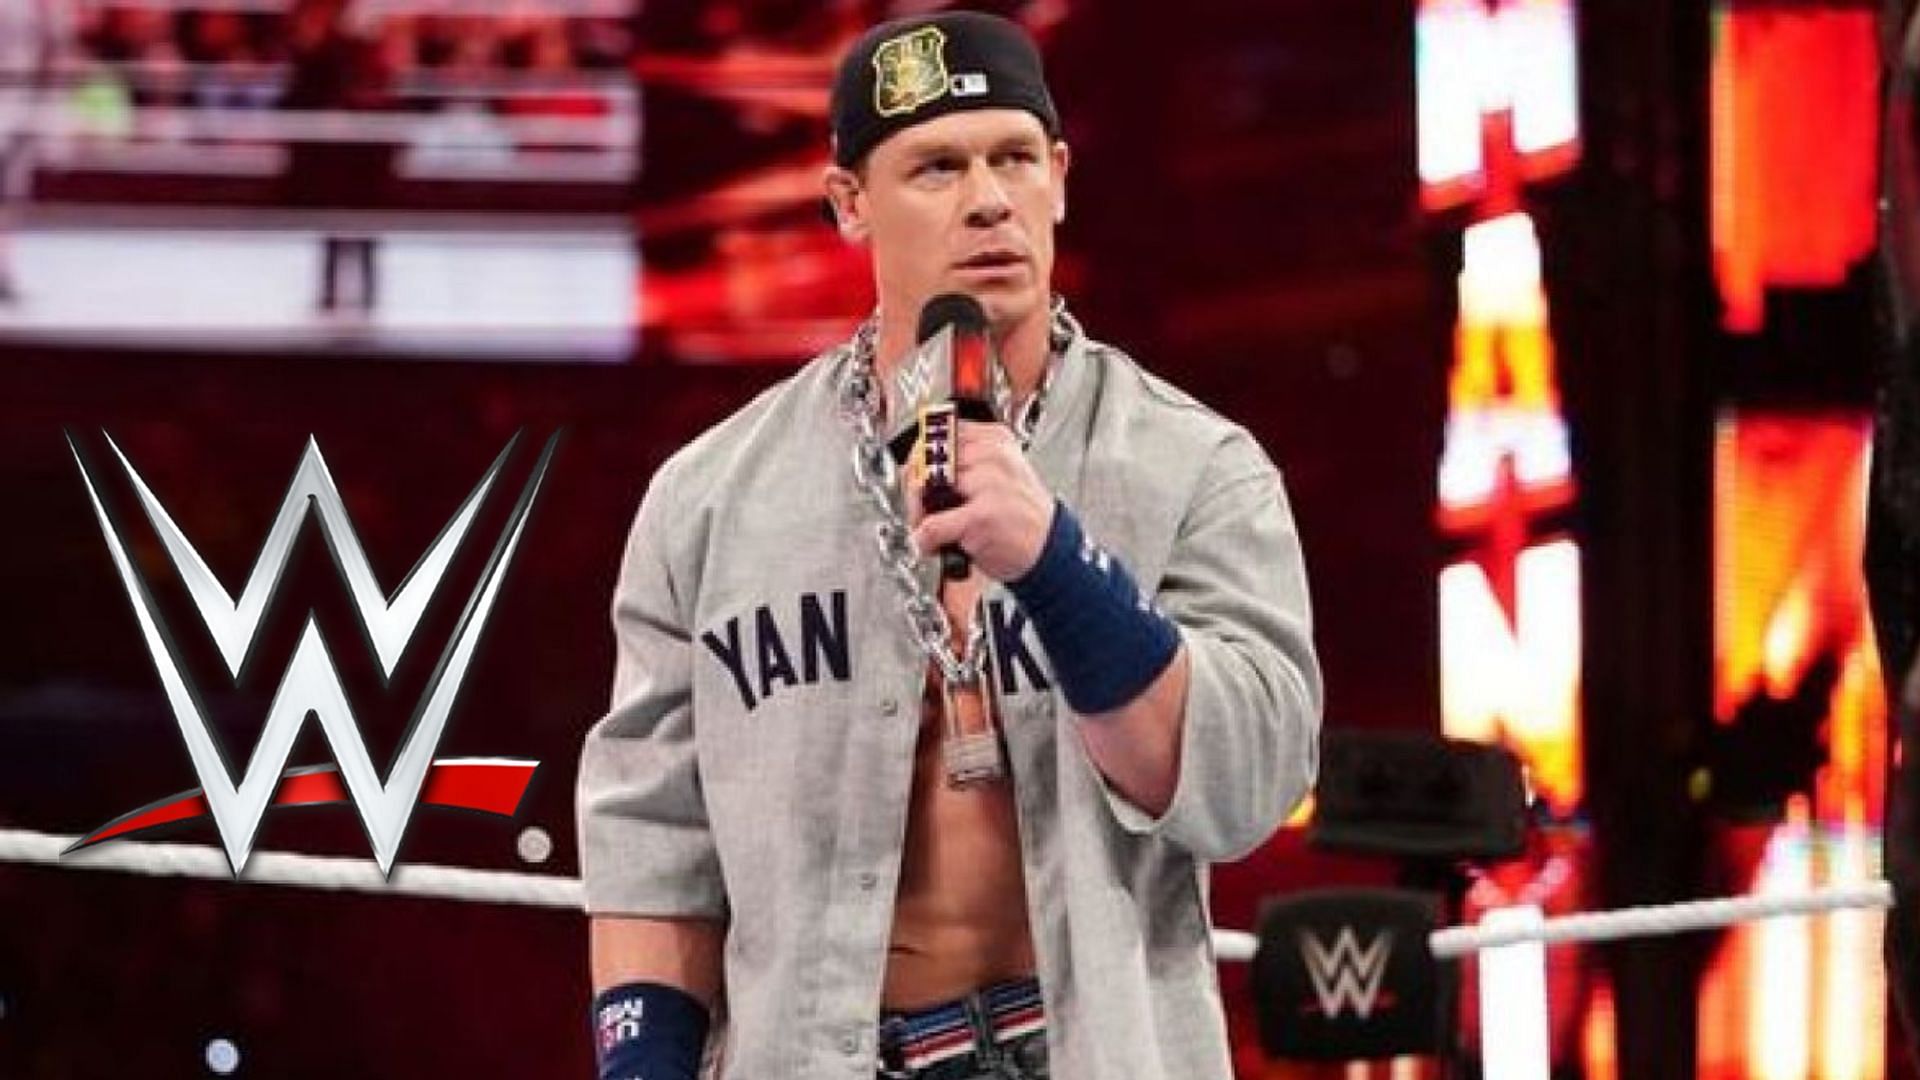 John Cena is currently a major star in Hollywood